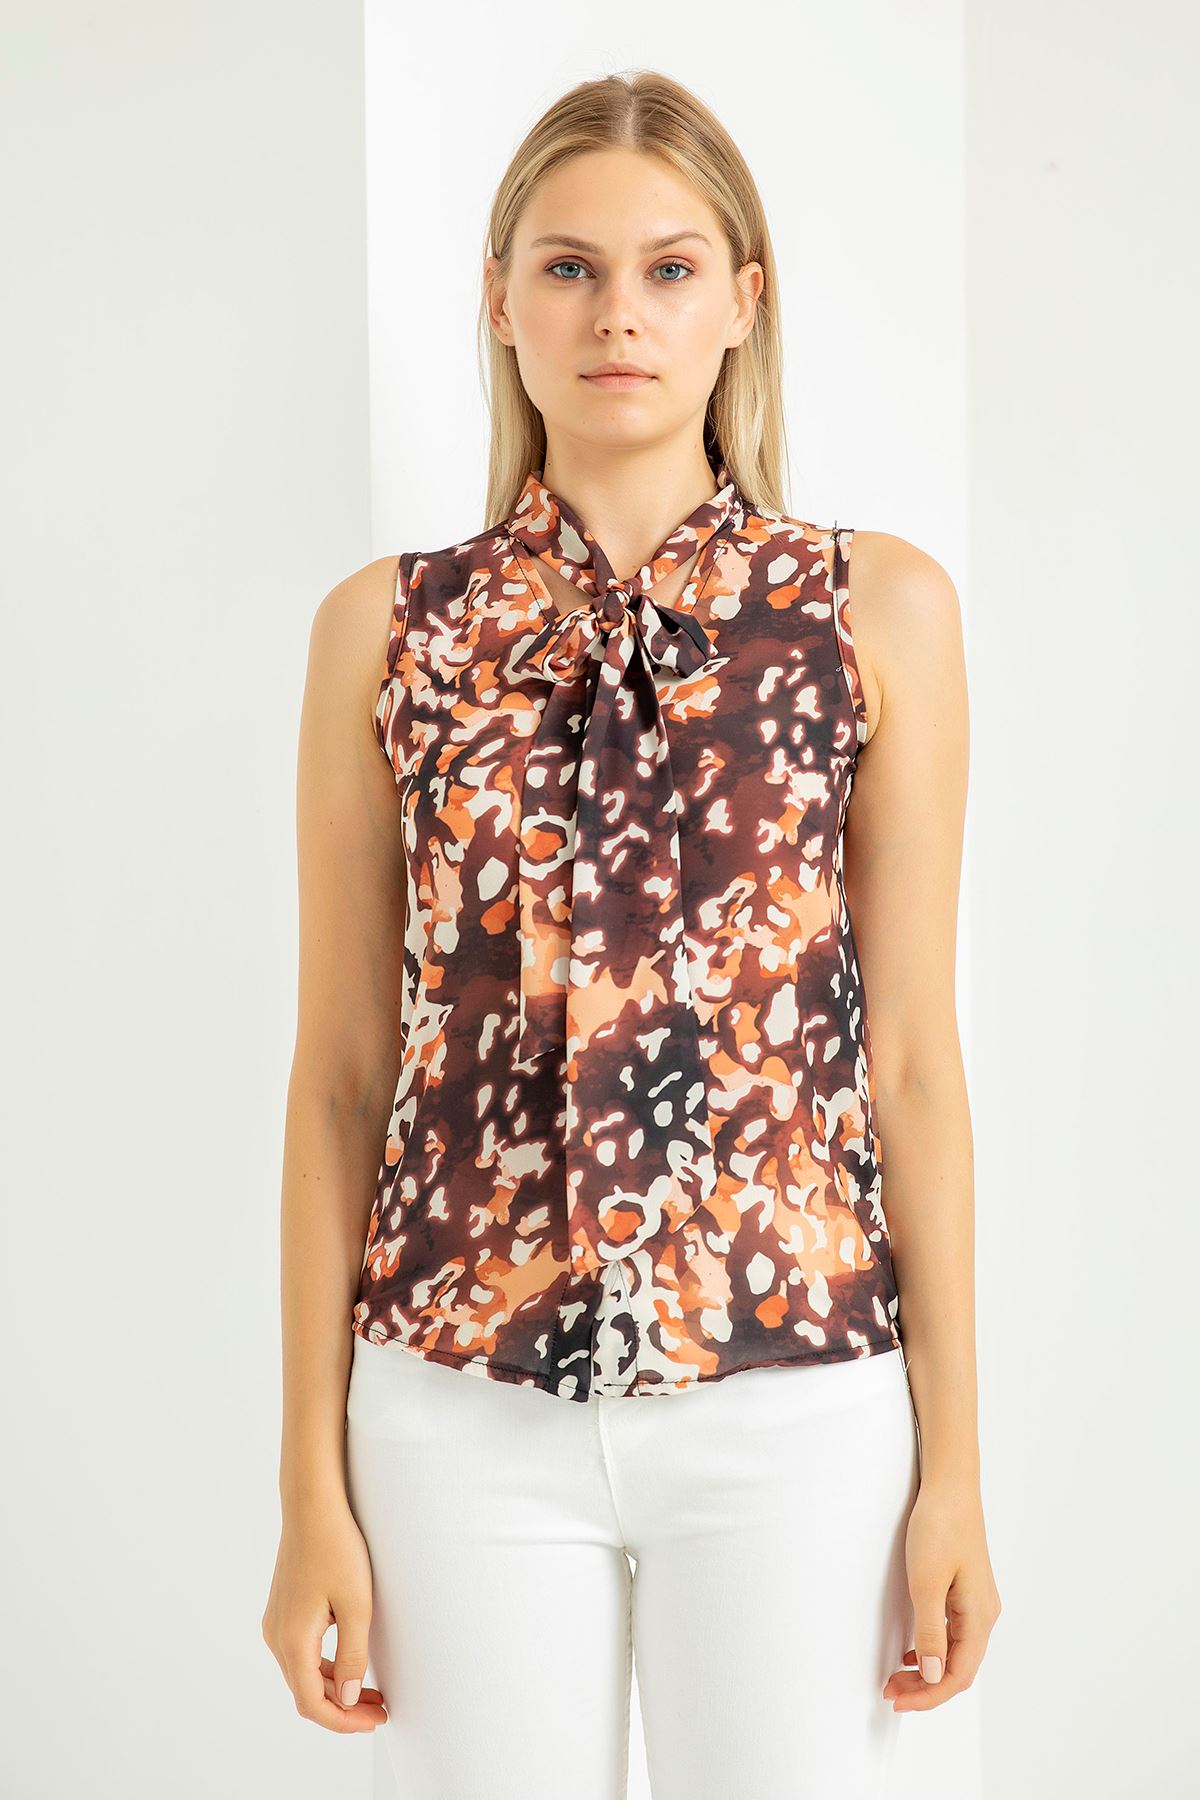 Jessica Fabric Sleeveless Full Patterned Scarf Collar Blouse - Chanterelle 